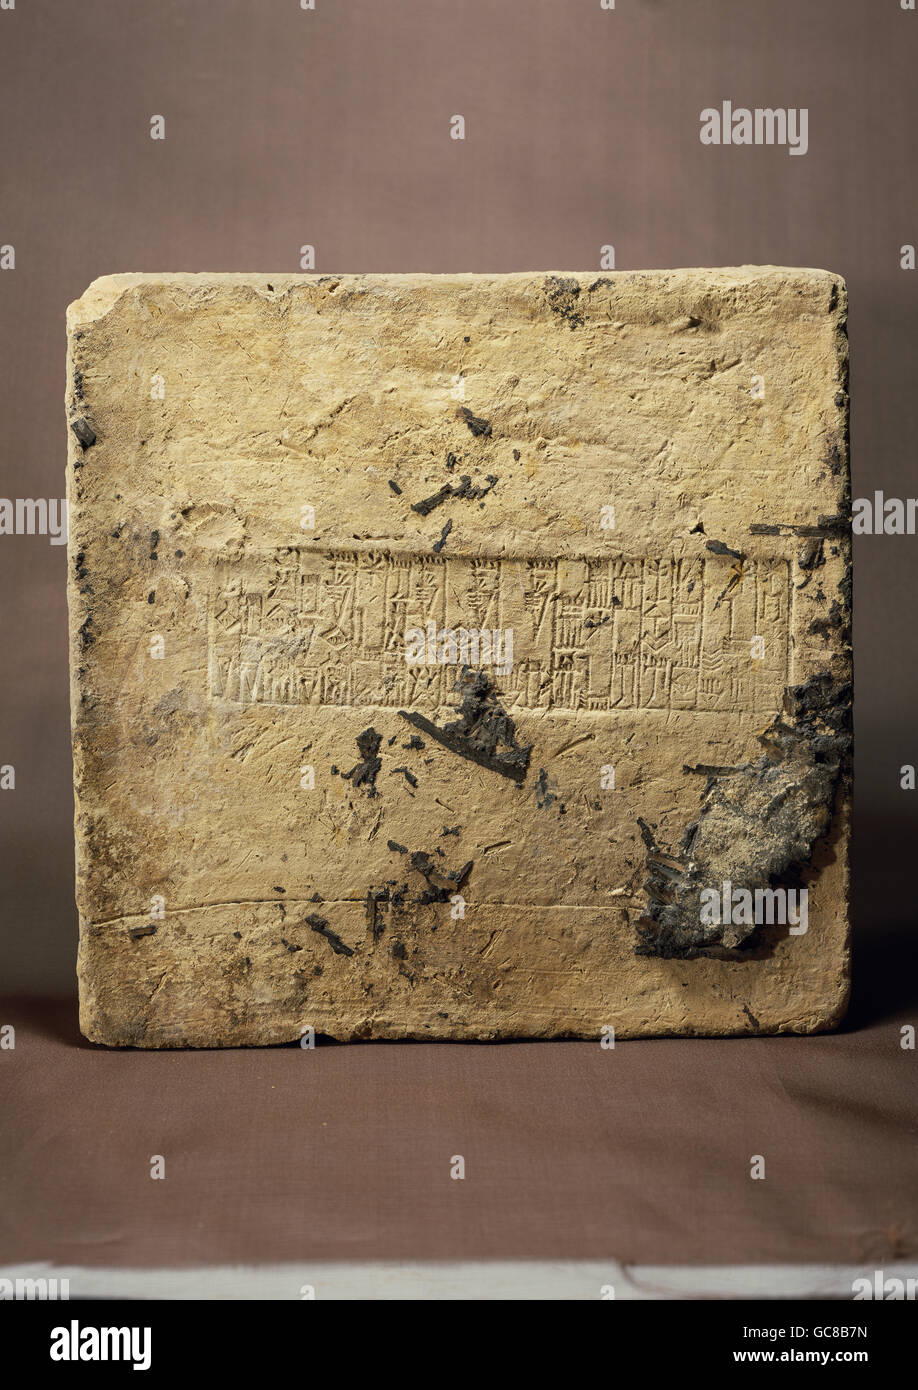 writing, scripture, cuneiform writing, brick with stamp, Eridu, Temple of Enki, period of King Amar-Sin, circa 2046 - 2038 BC, Prehistoric Collection, Munich, Sumer, Sumerian, Mesopotamia, ancient world, antiquity, adobe, Irak, Amar - Sin, historic, historical, ancient world, Additional-Rights-Clearences-Not Available Stock Photo